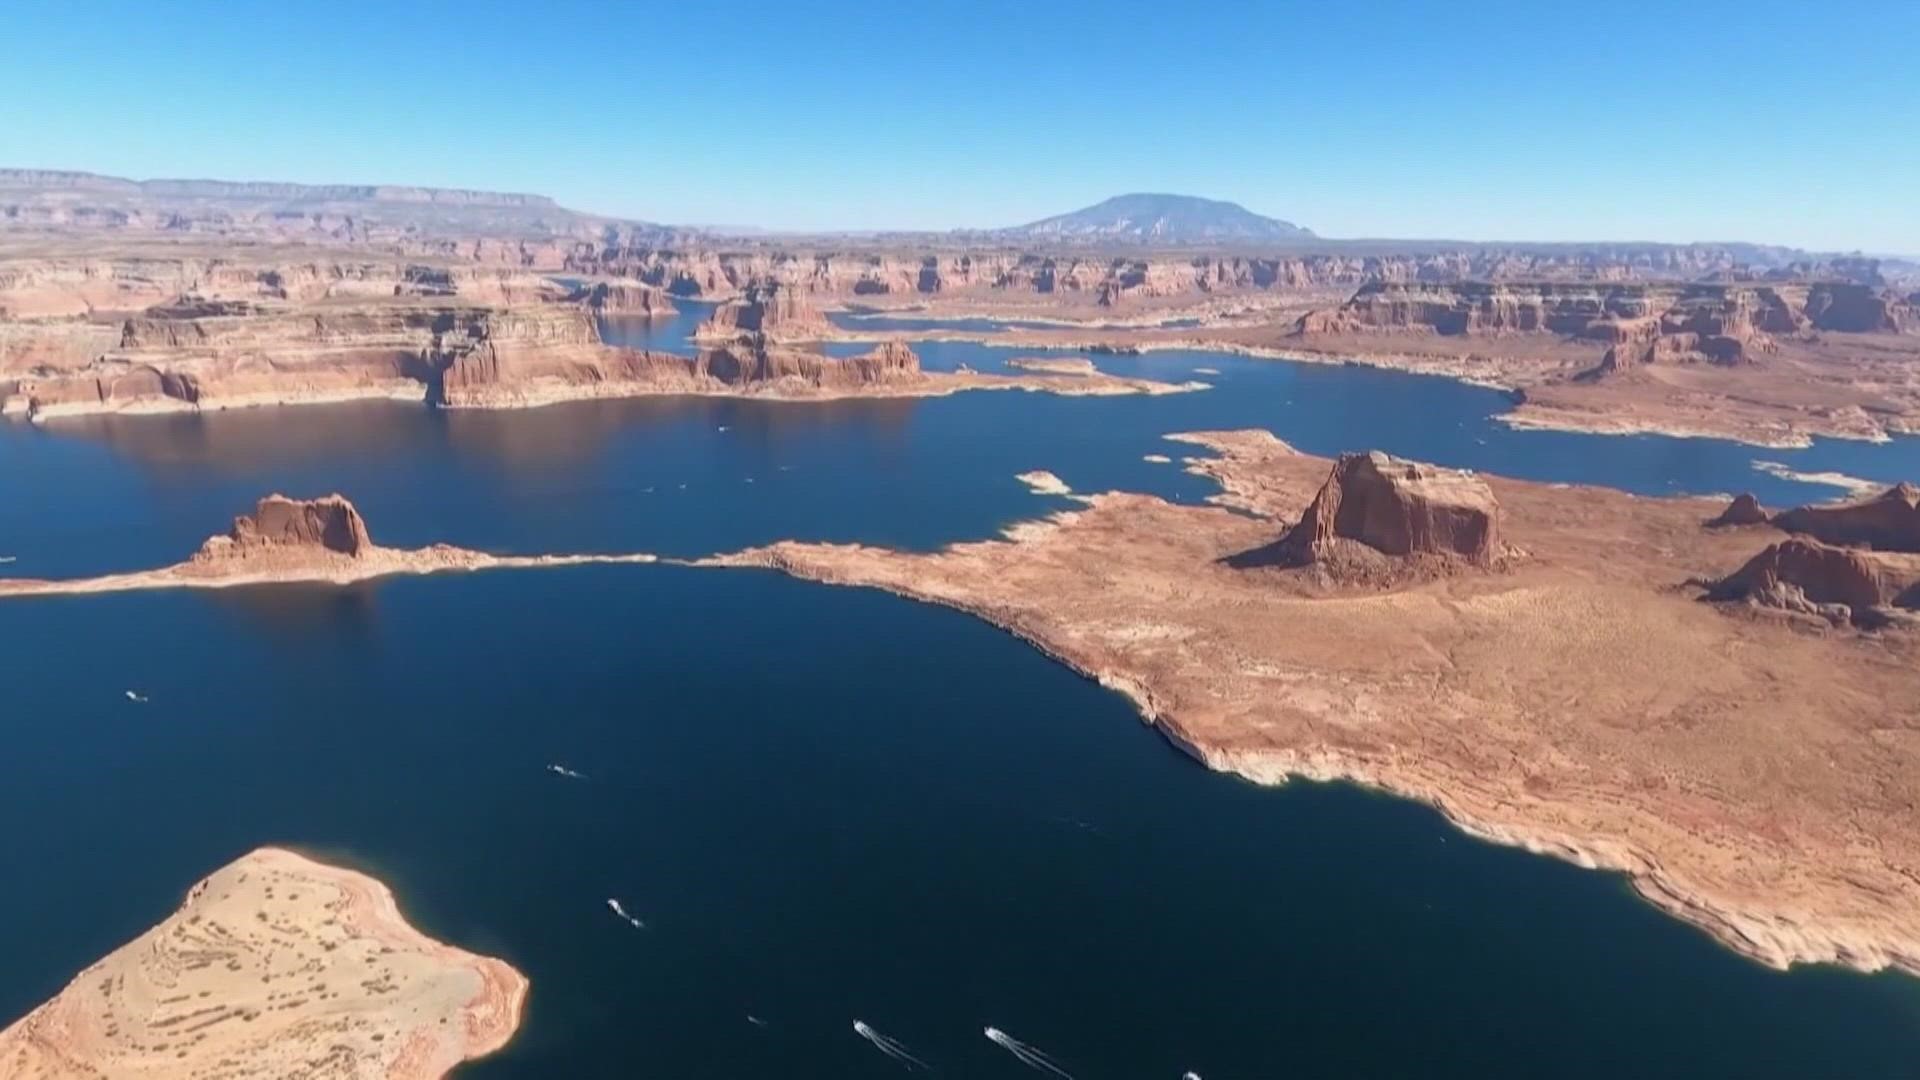 Water managers plan to implement temporary solutions to avoid critical levels at Lake Powell in 2022, while working on long-term solutions.